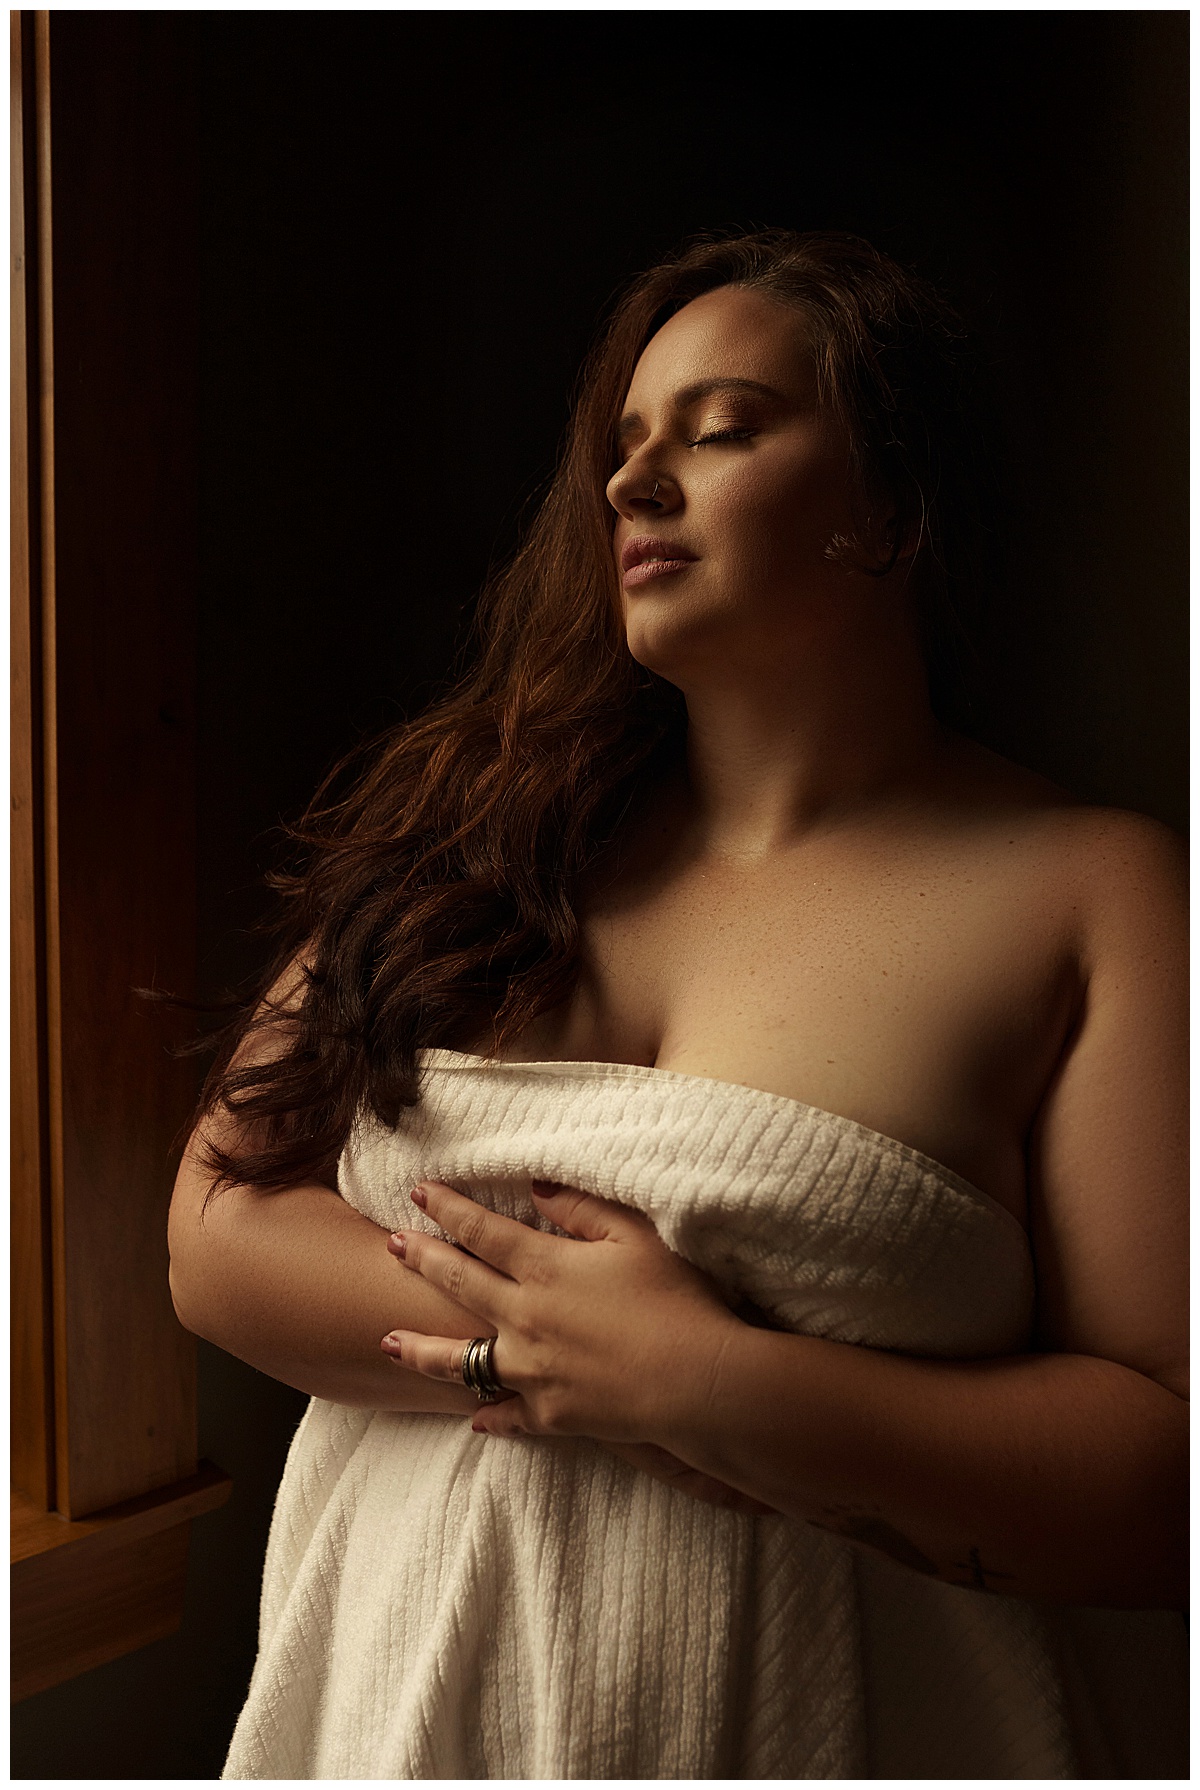 Female covers her body with a towel for Emma Christine Photography